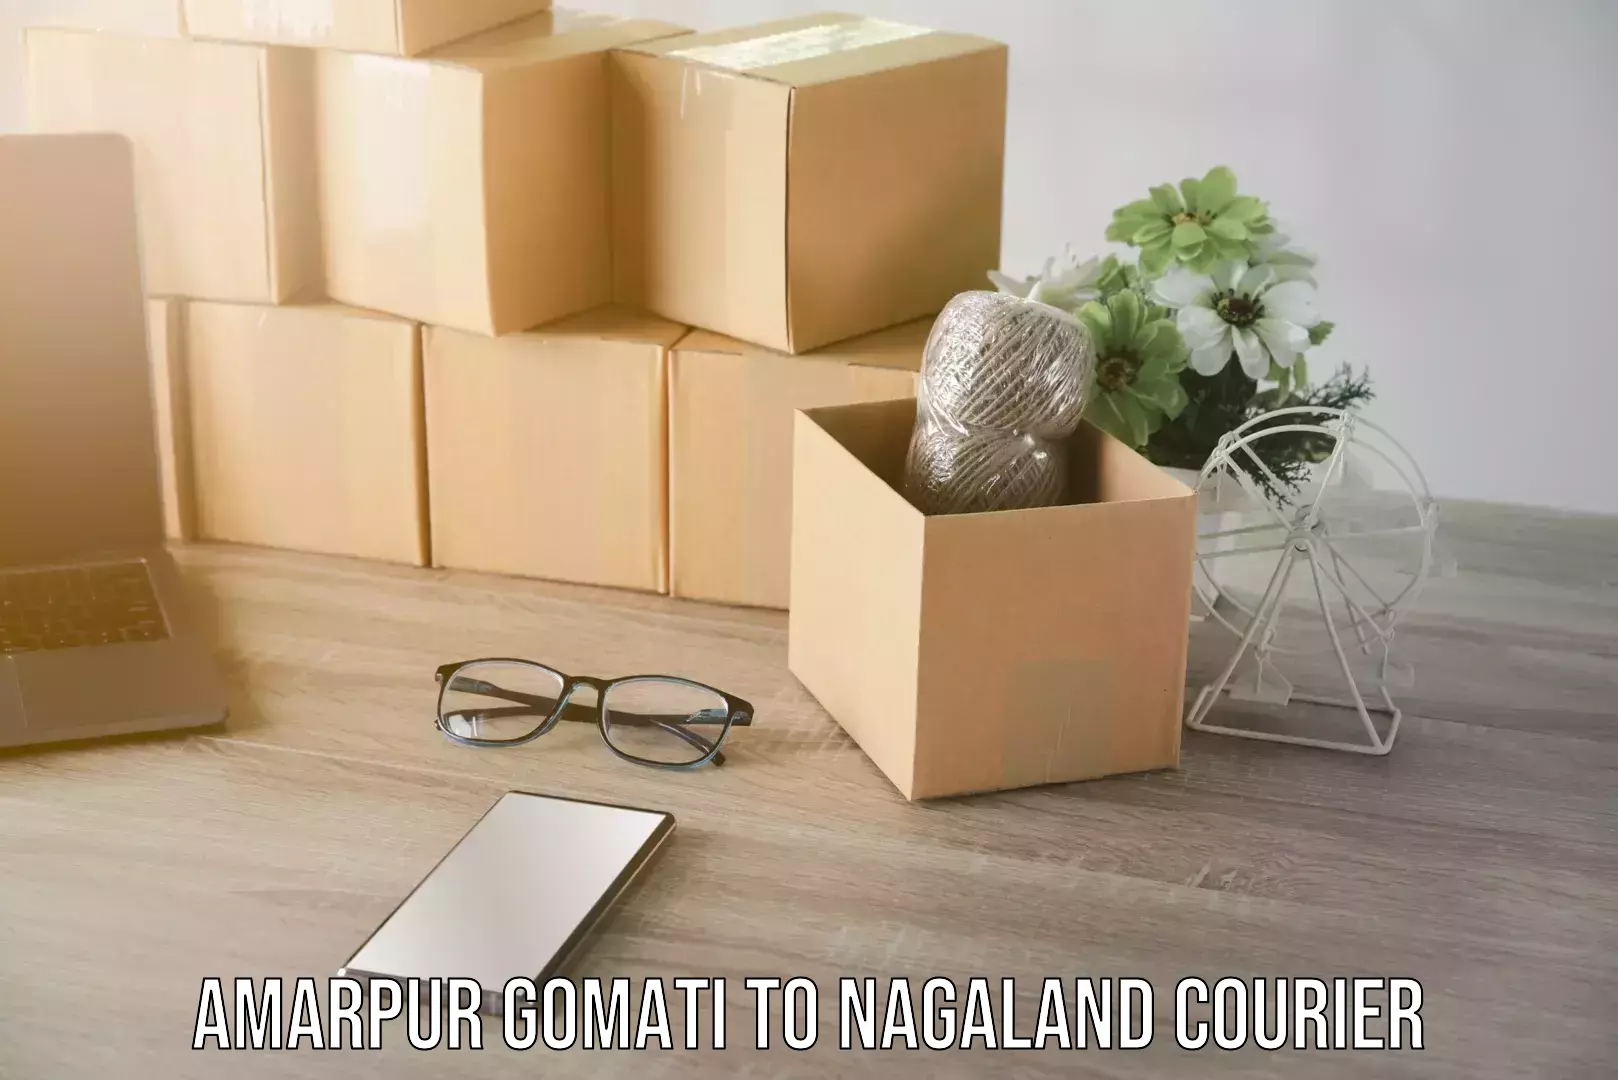 Cash on delivery service Amarpur Gomati to Nagaland